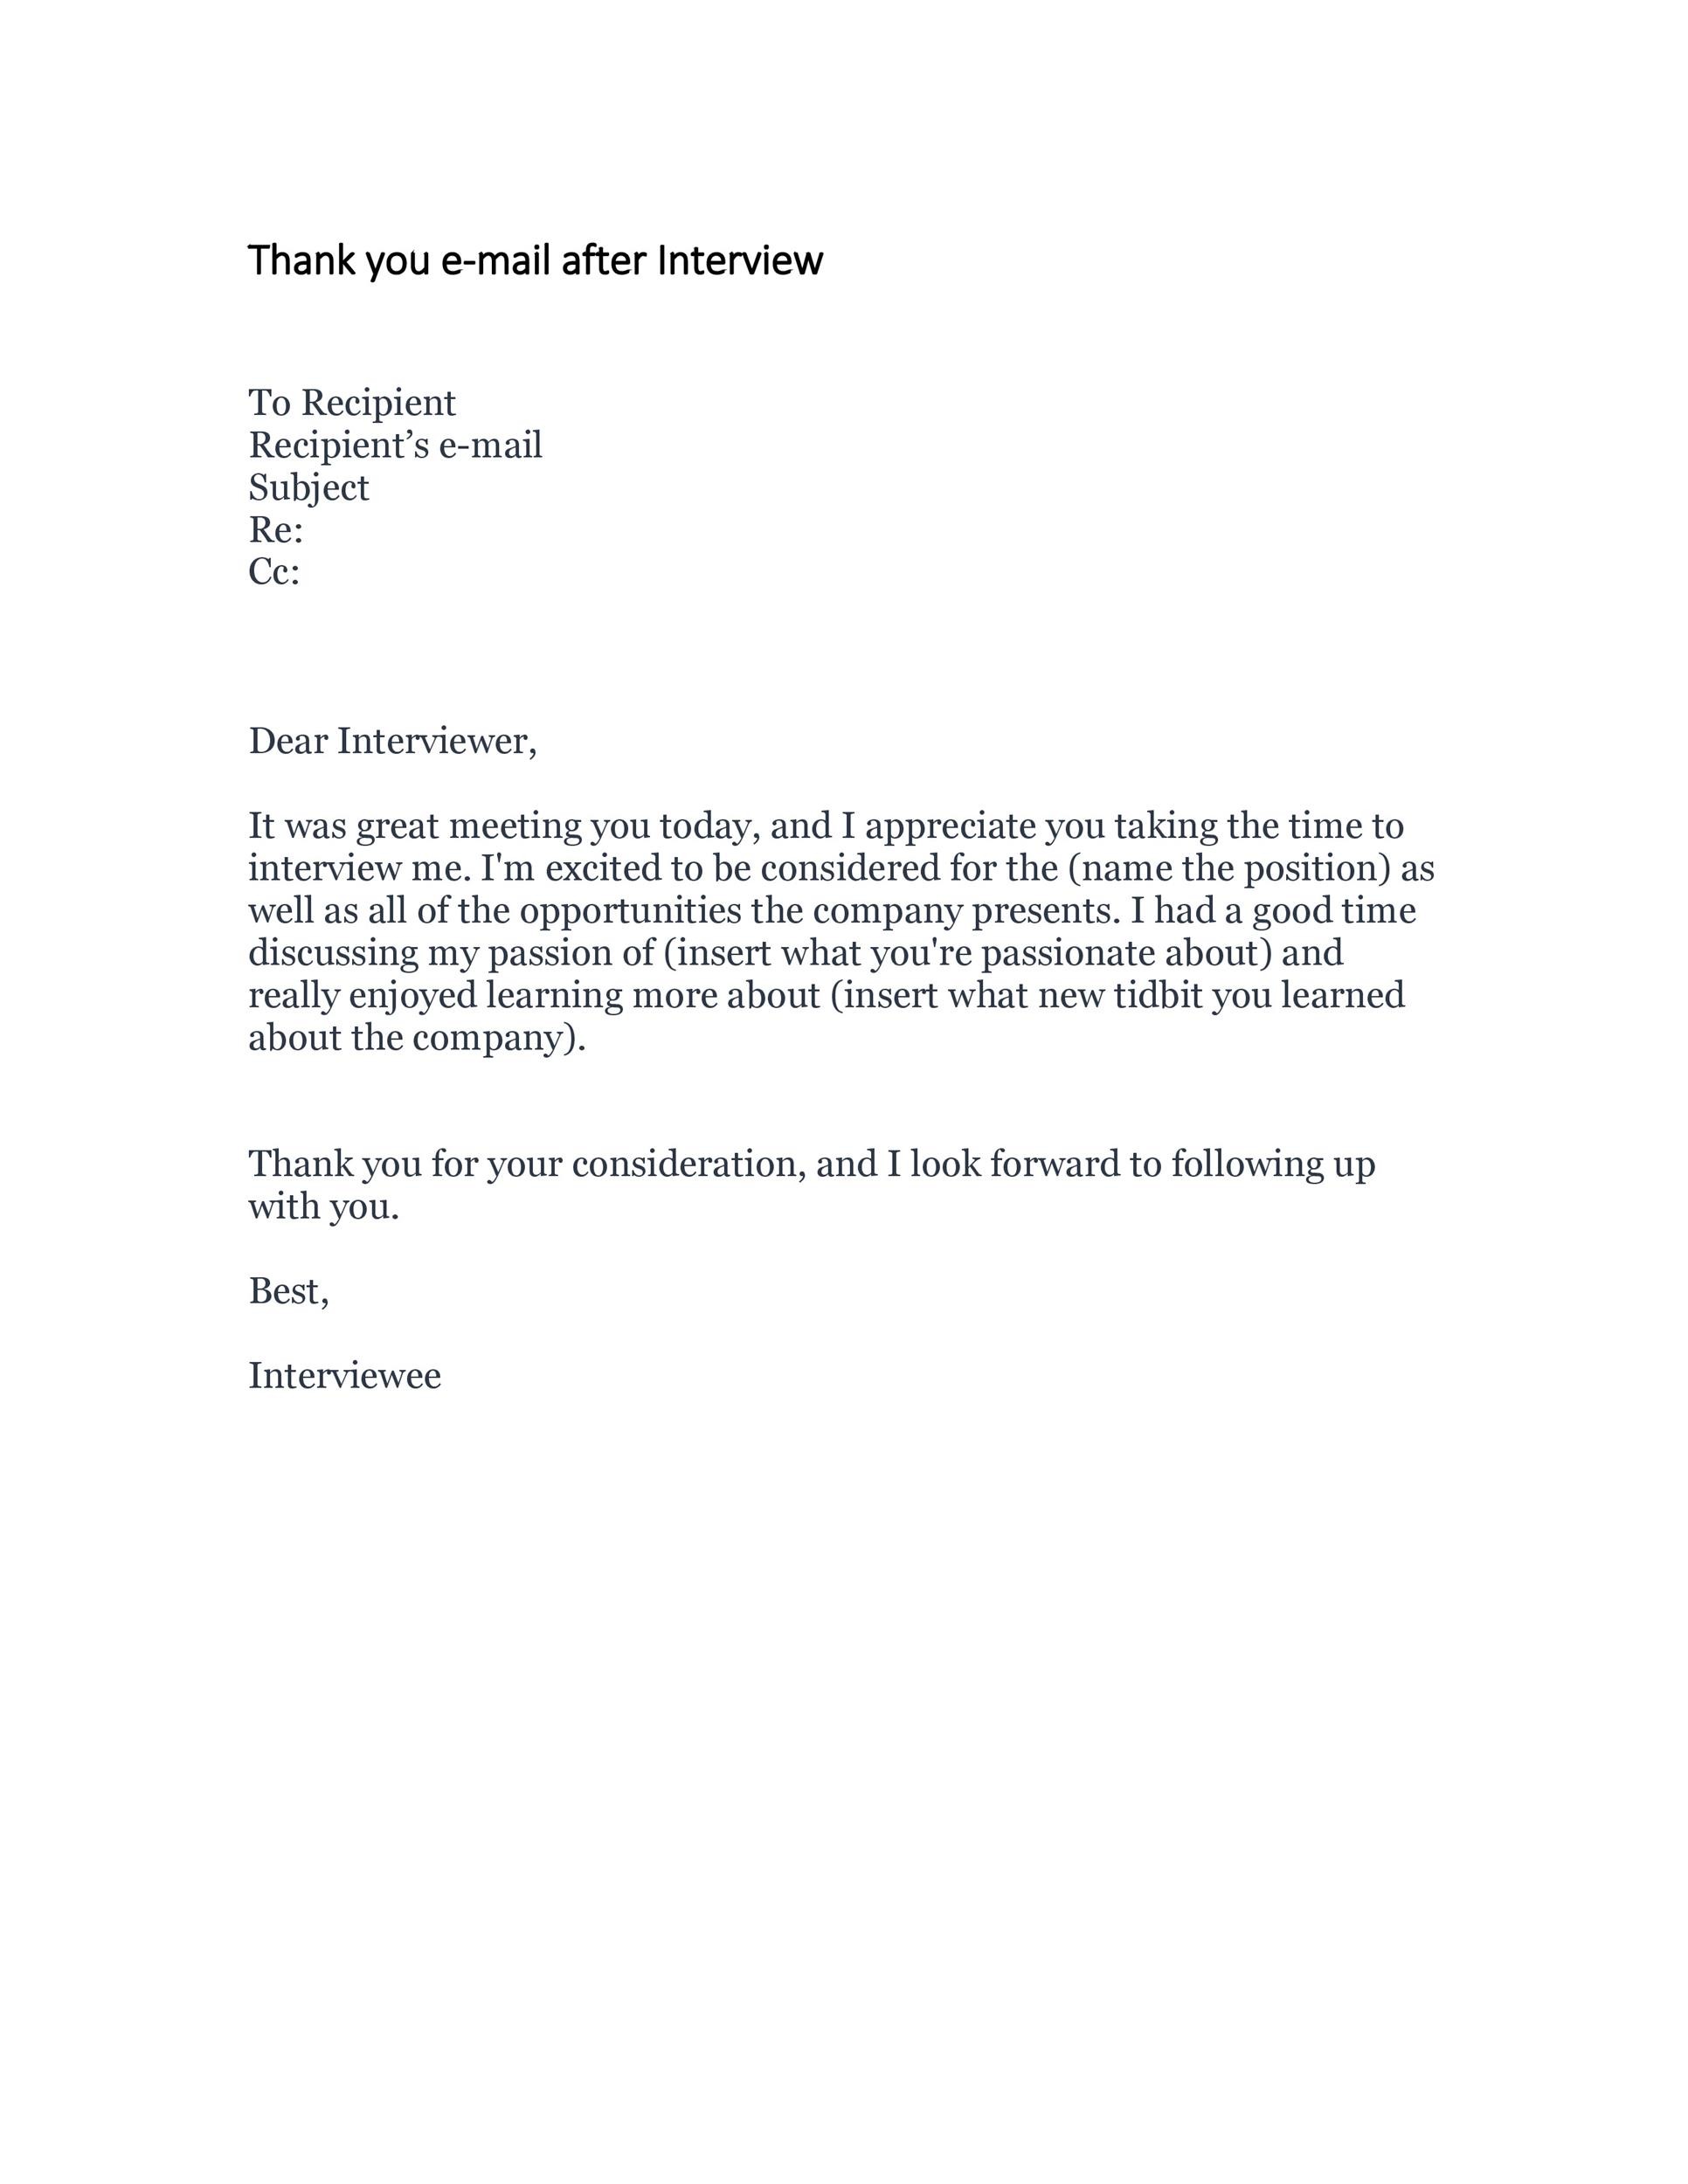 Free Thank you e-mail after Interview Template 32